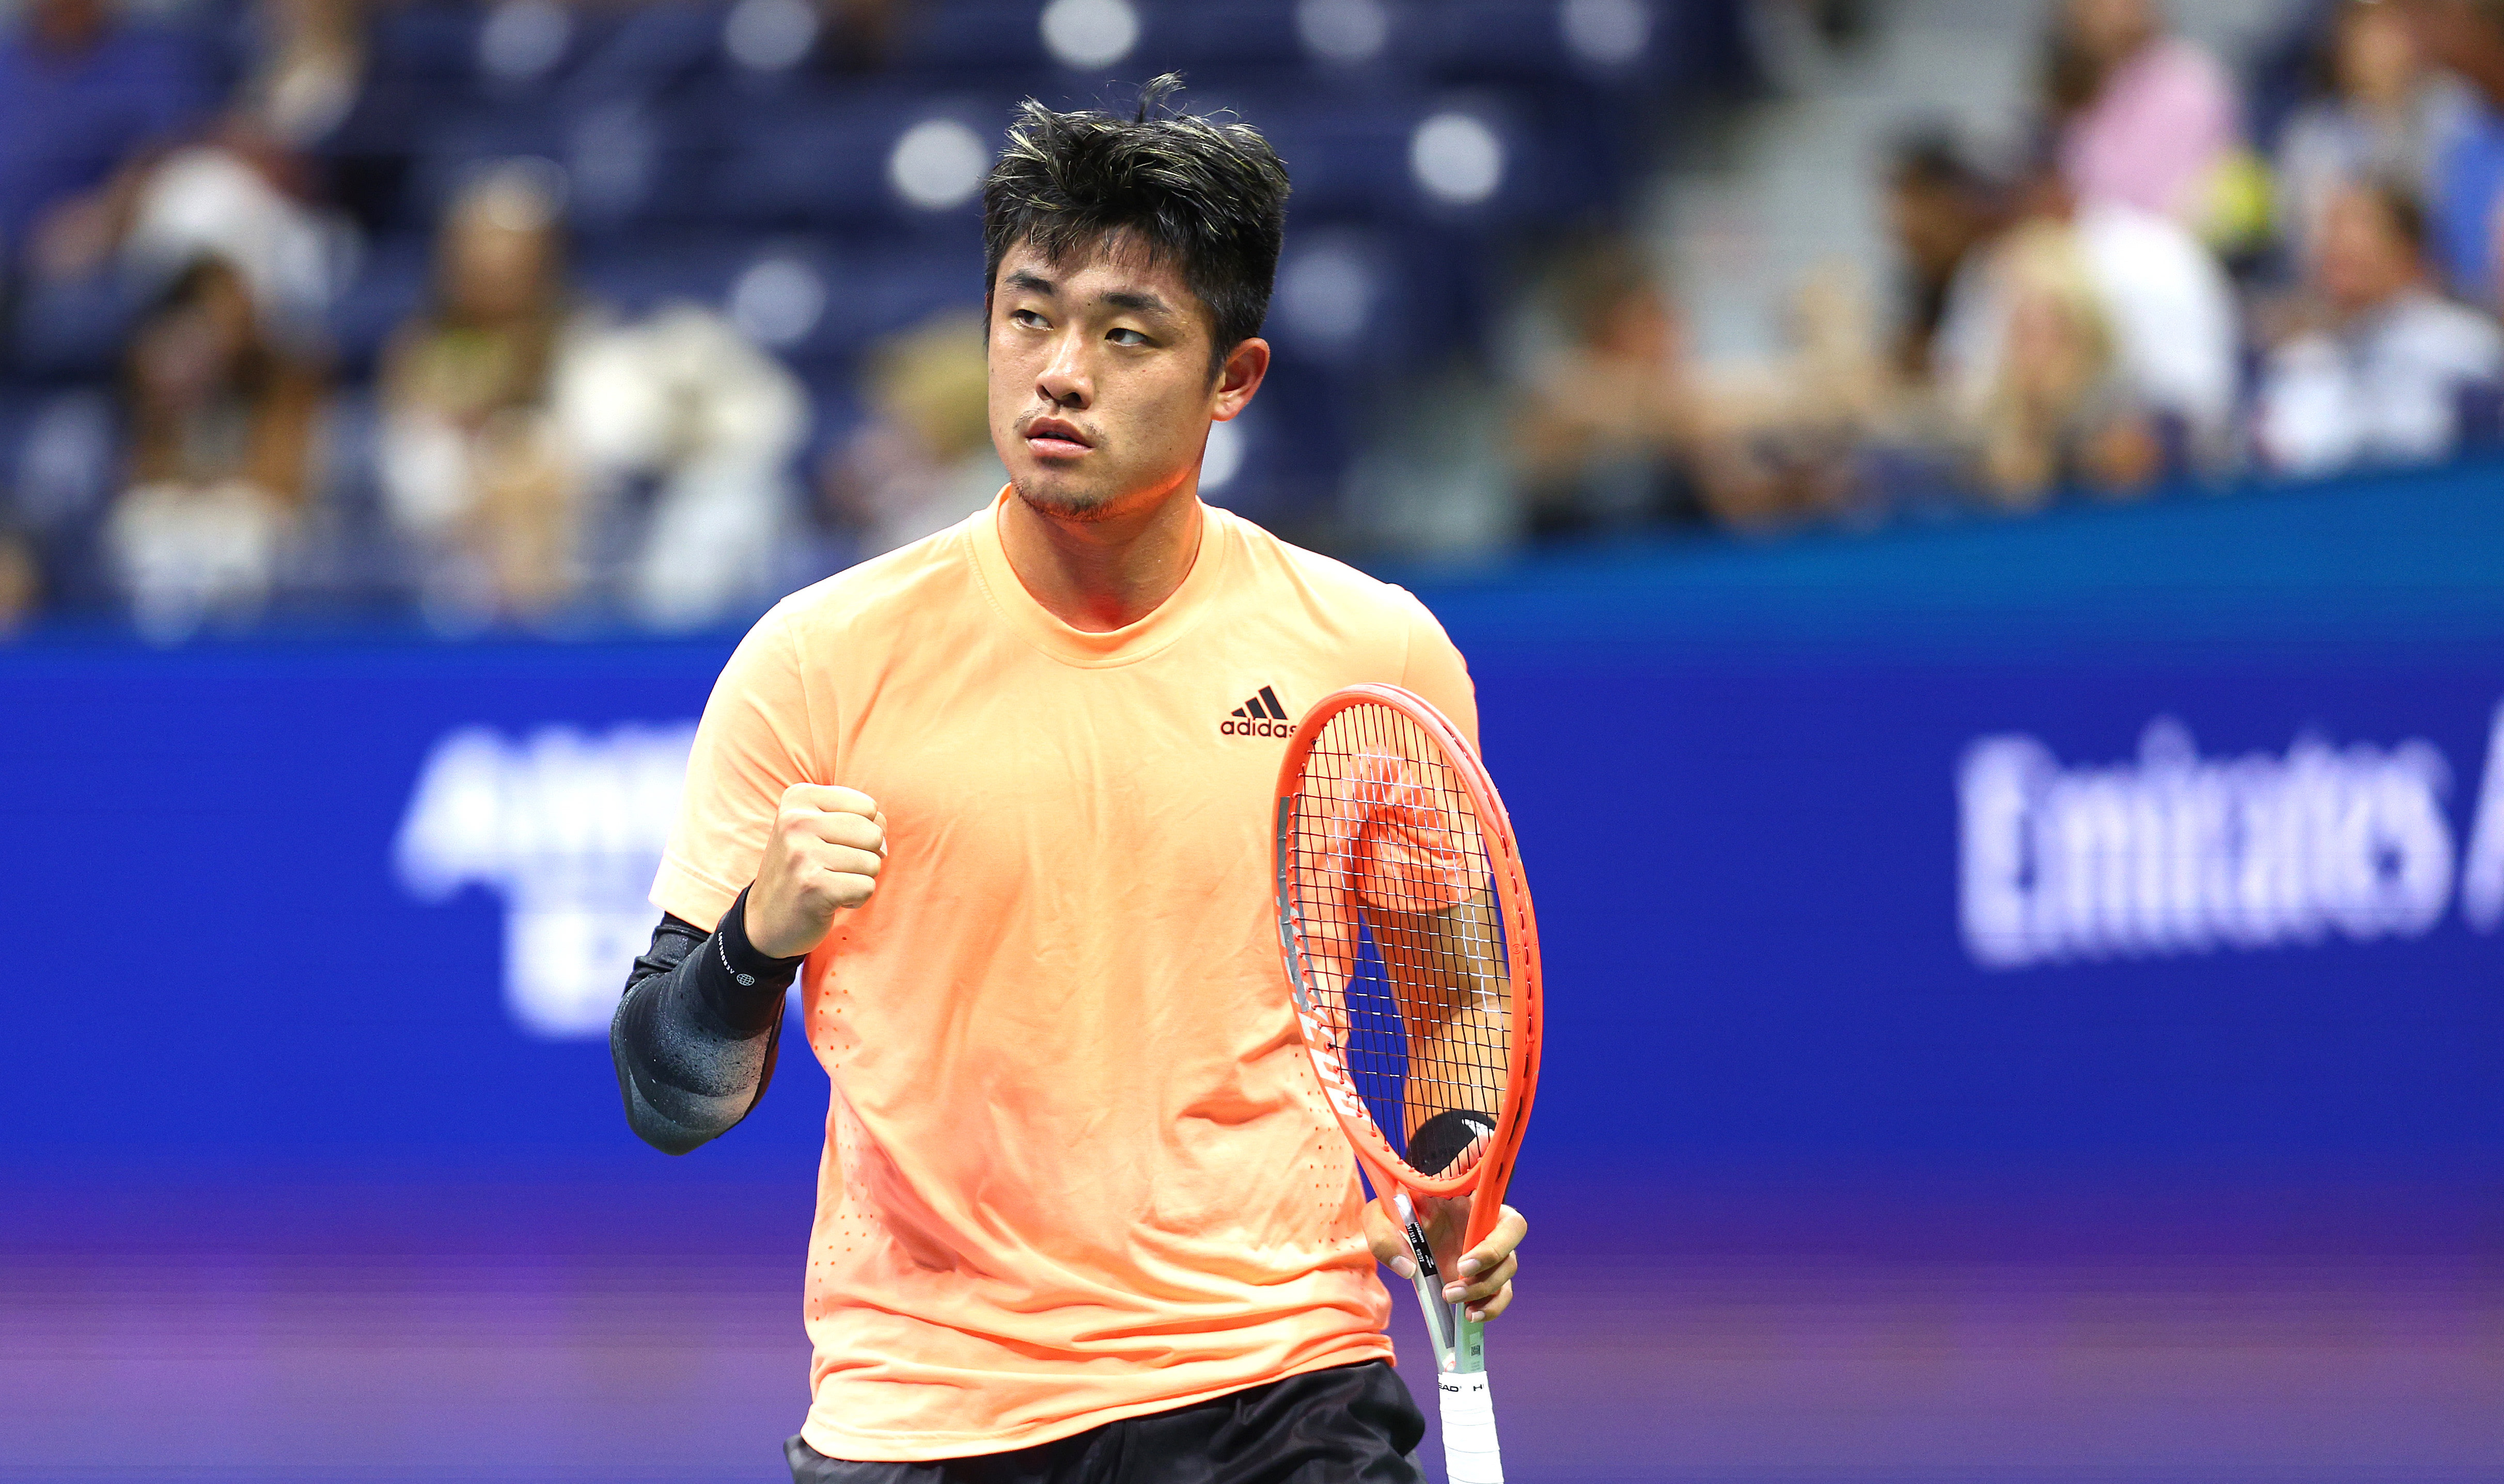 Wu Yibing defeats Taylor Fritz to become first Chinese man to reach an ATP final in Open Era